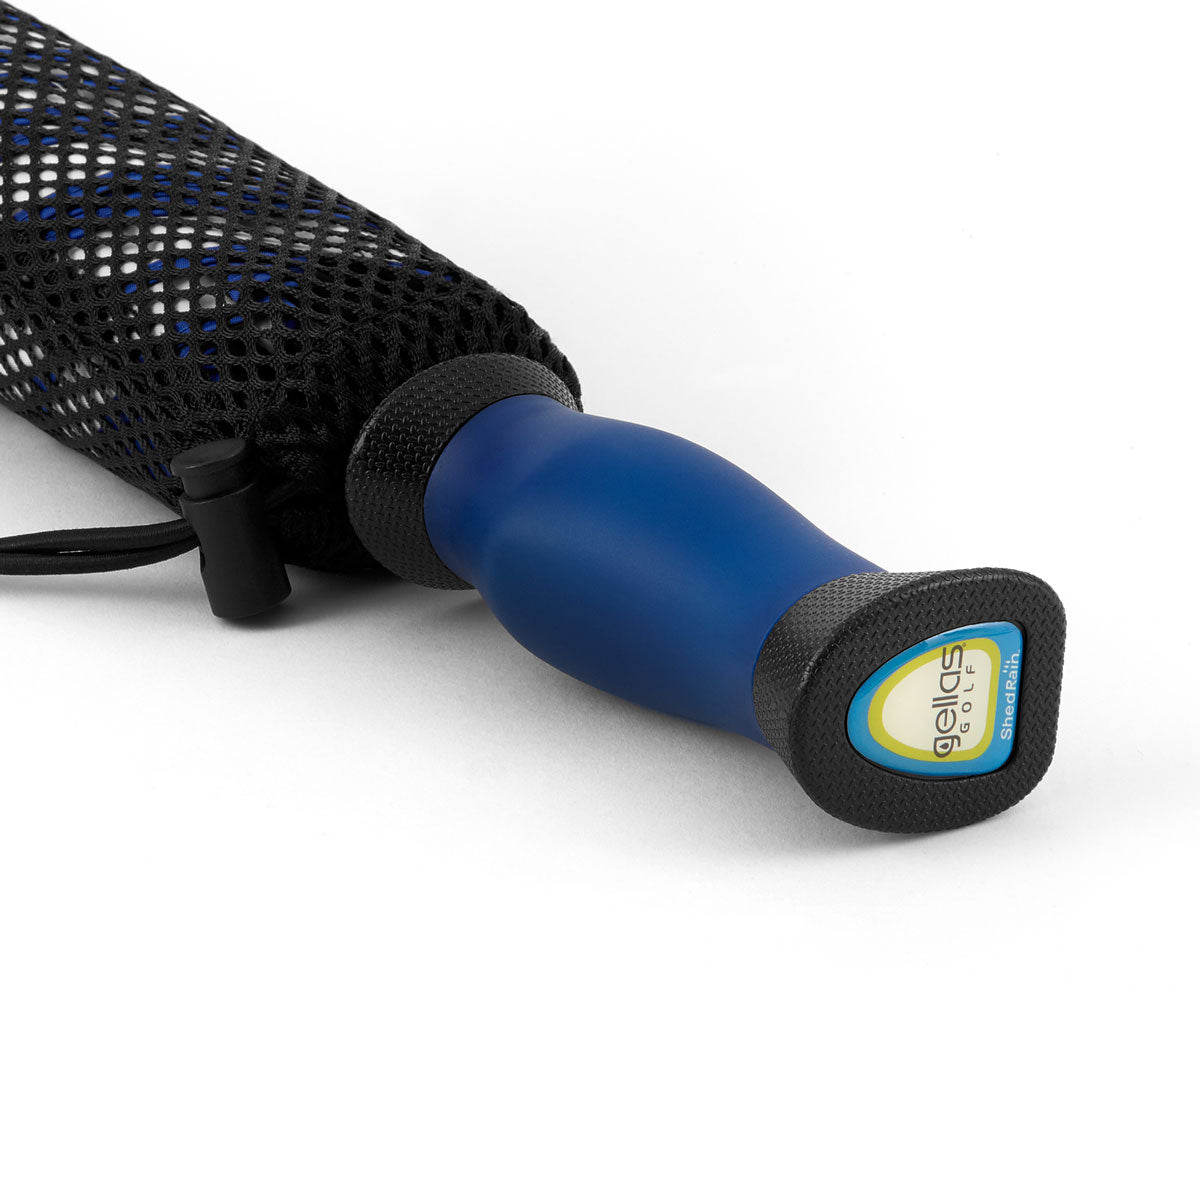 Close up image of a royal blue Gellas gel-filled cushion grip umbrella handle in its mesh bungee closure travel case 